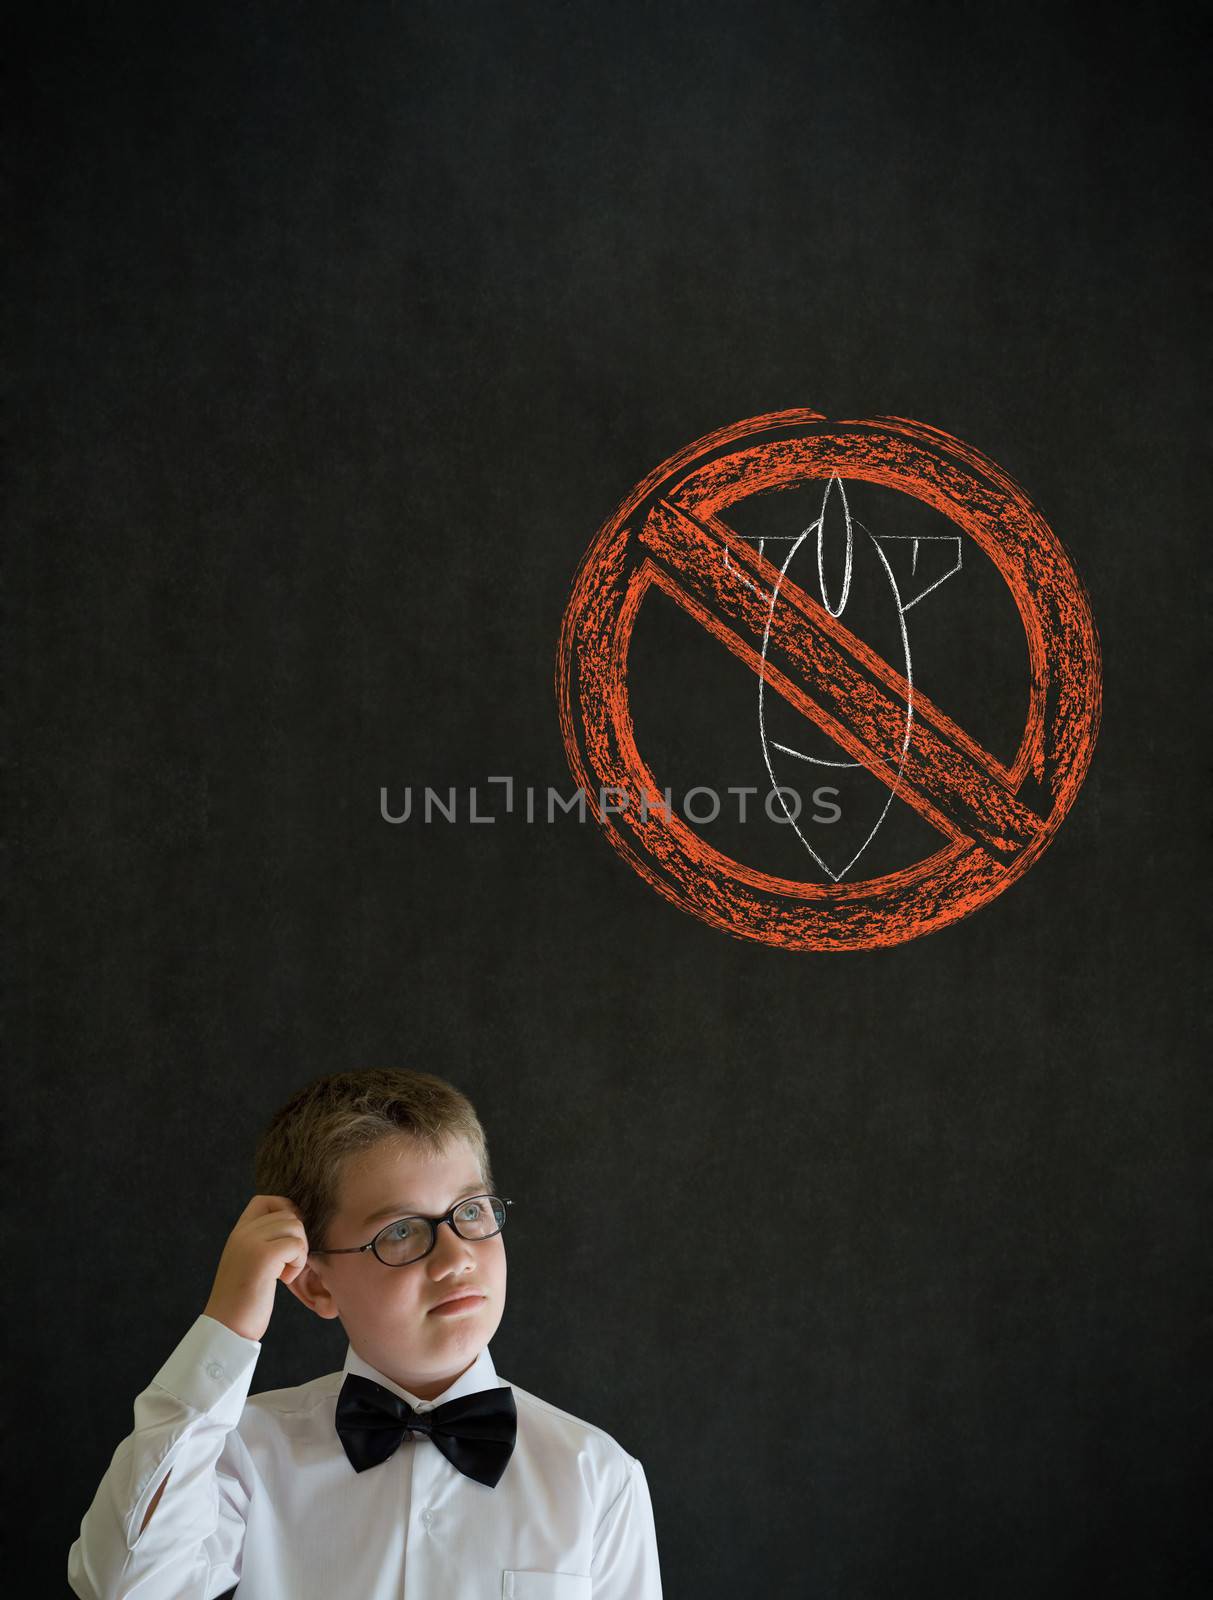 Scratching head thinking boy dressed up as business man with politician no bombs war pacifist sign on blackboard background